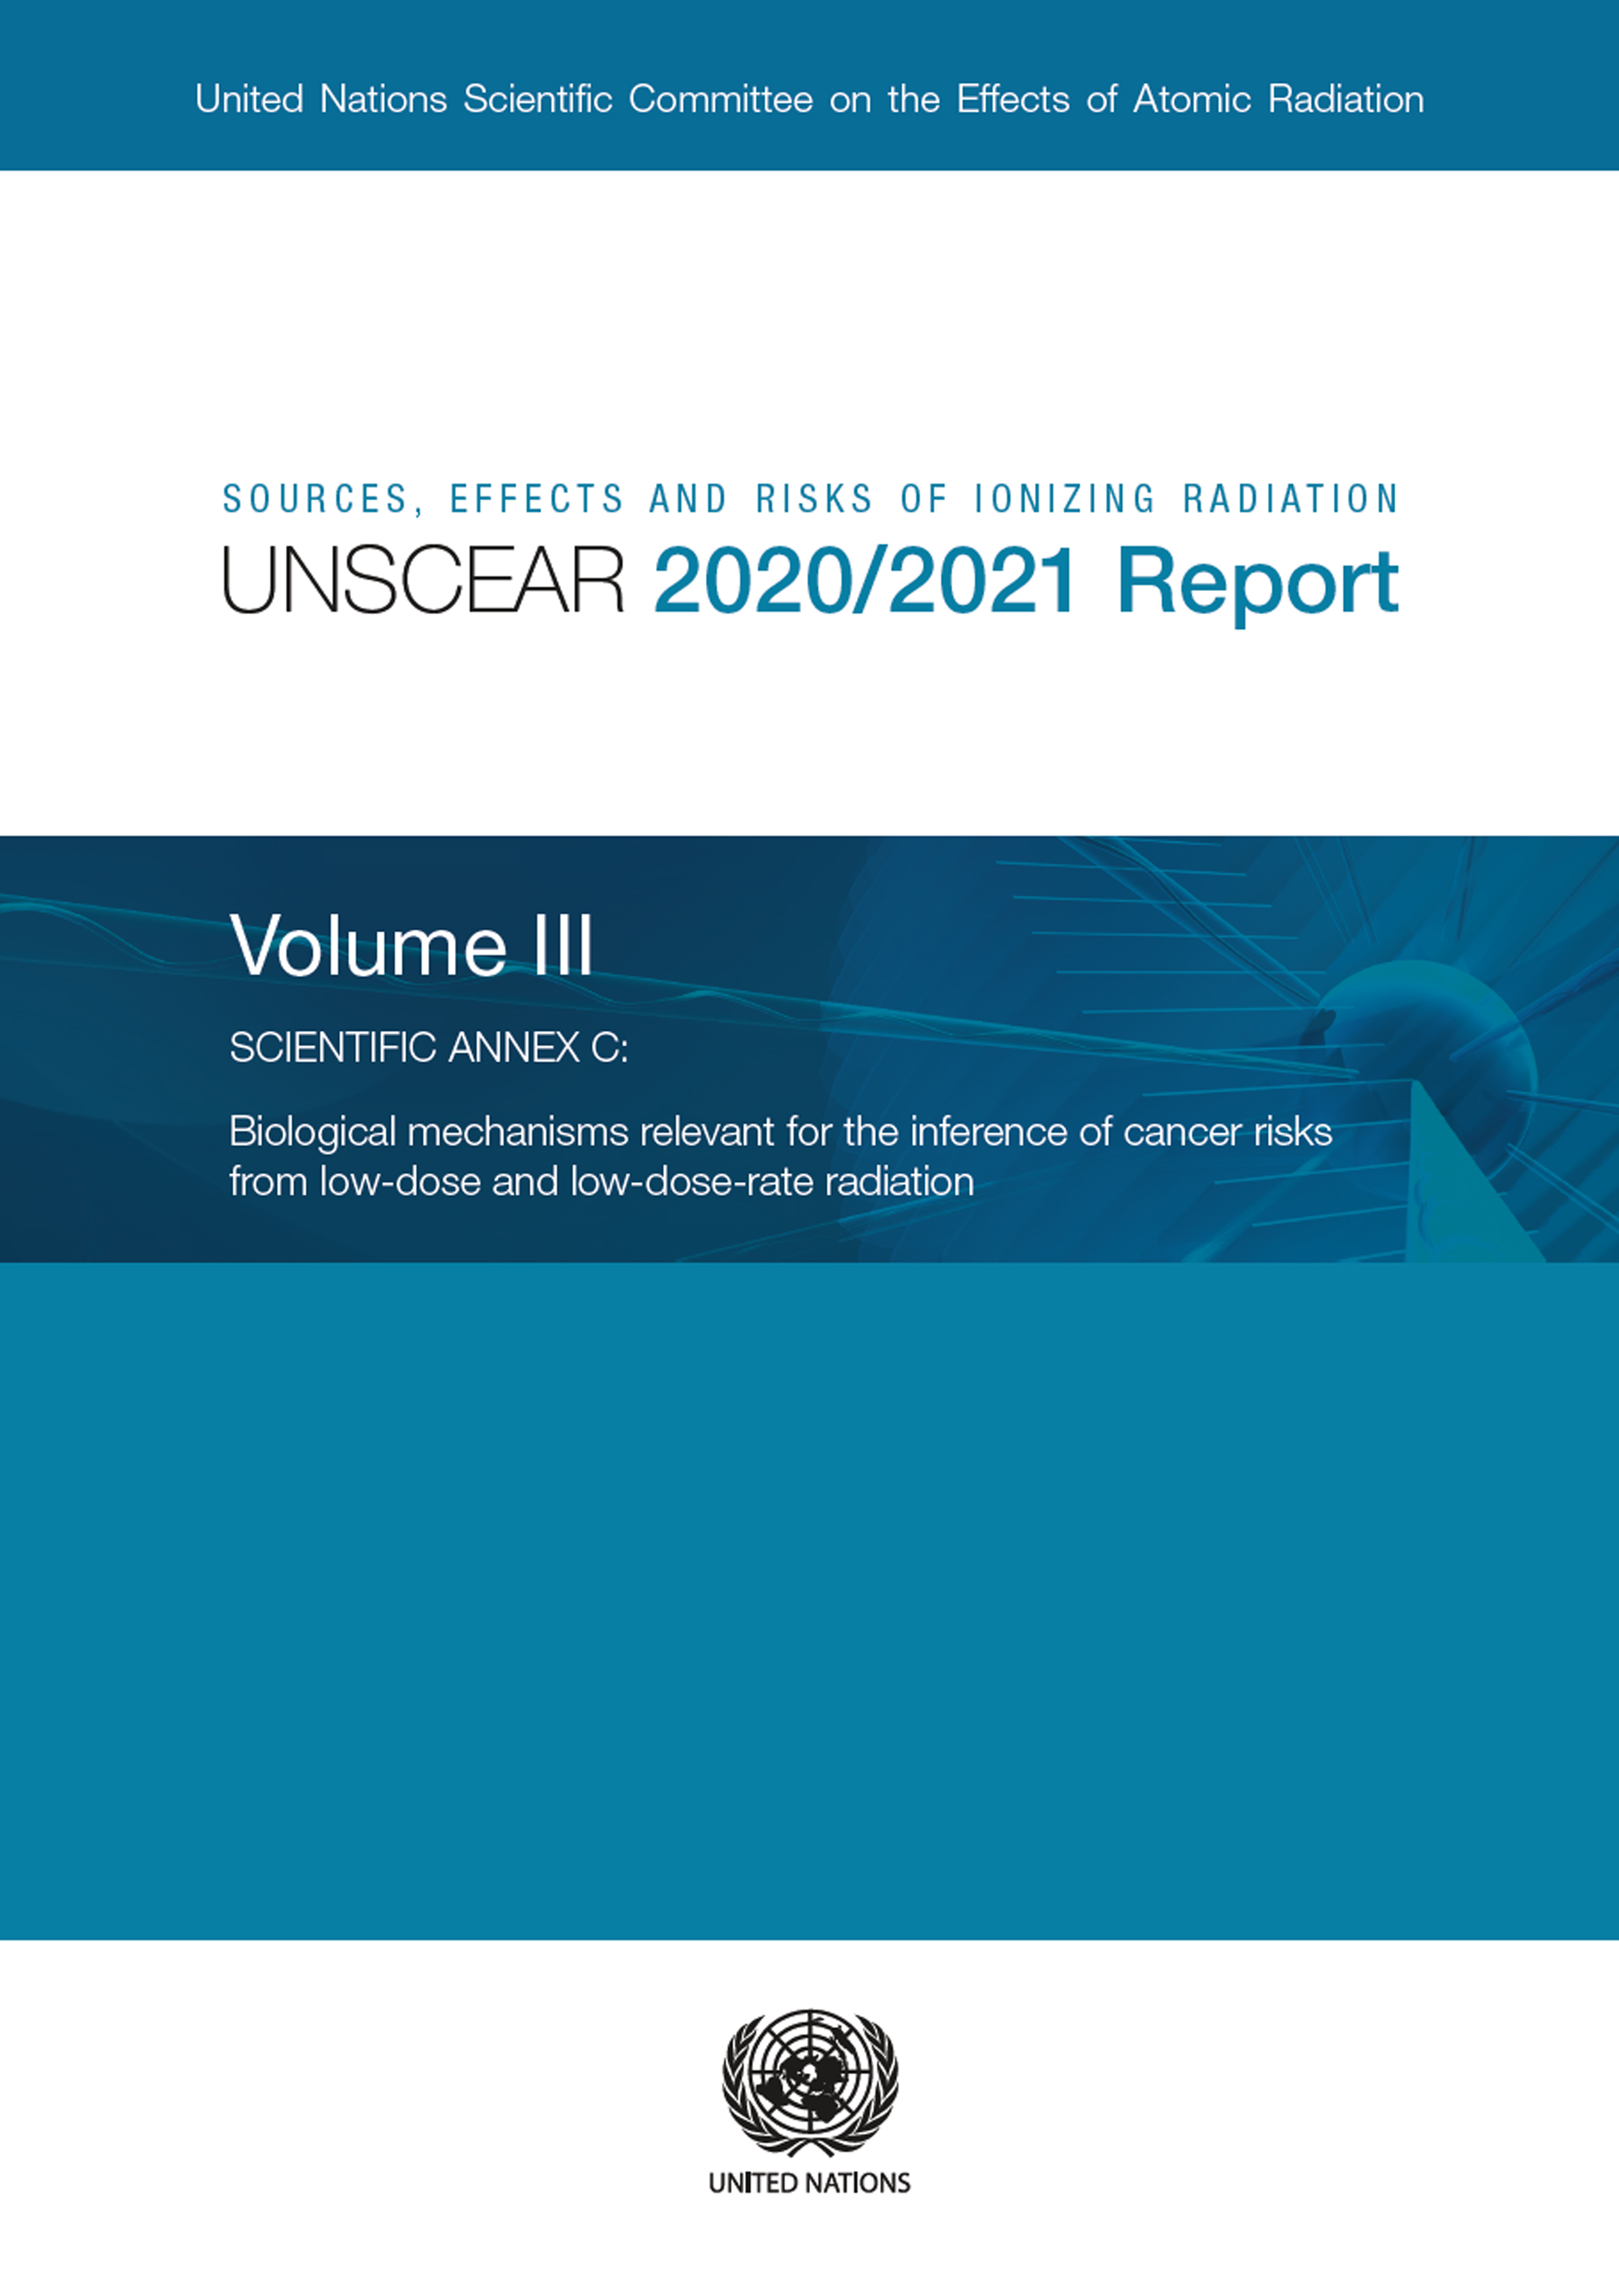 image of Sources, Effects and Risks of Ionizing Radiation, United Nations Scientific Committee on the Effects of Atomic Radiation (UNSCEAR) 2020/2021 Report, Volume III